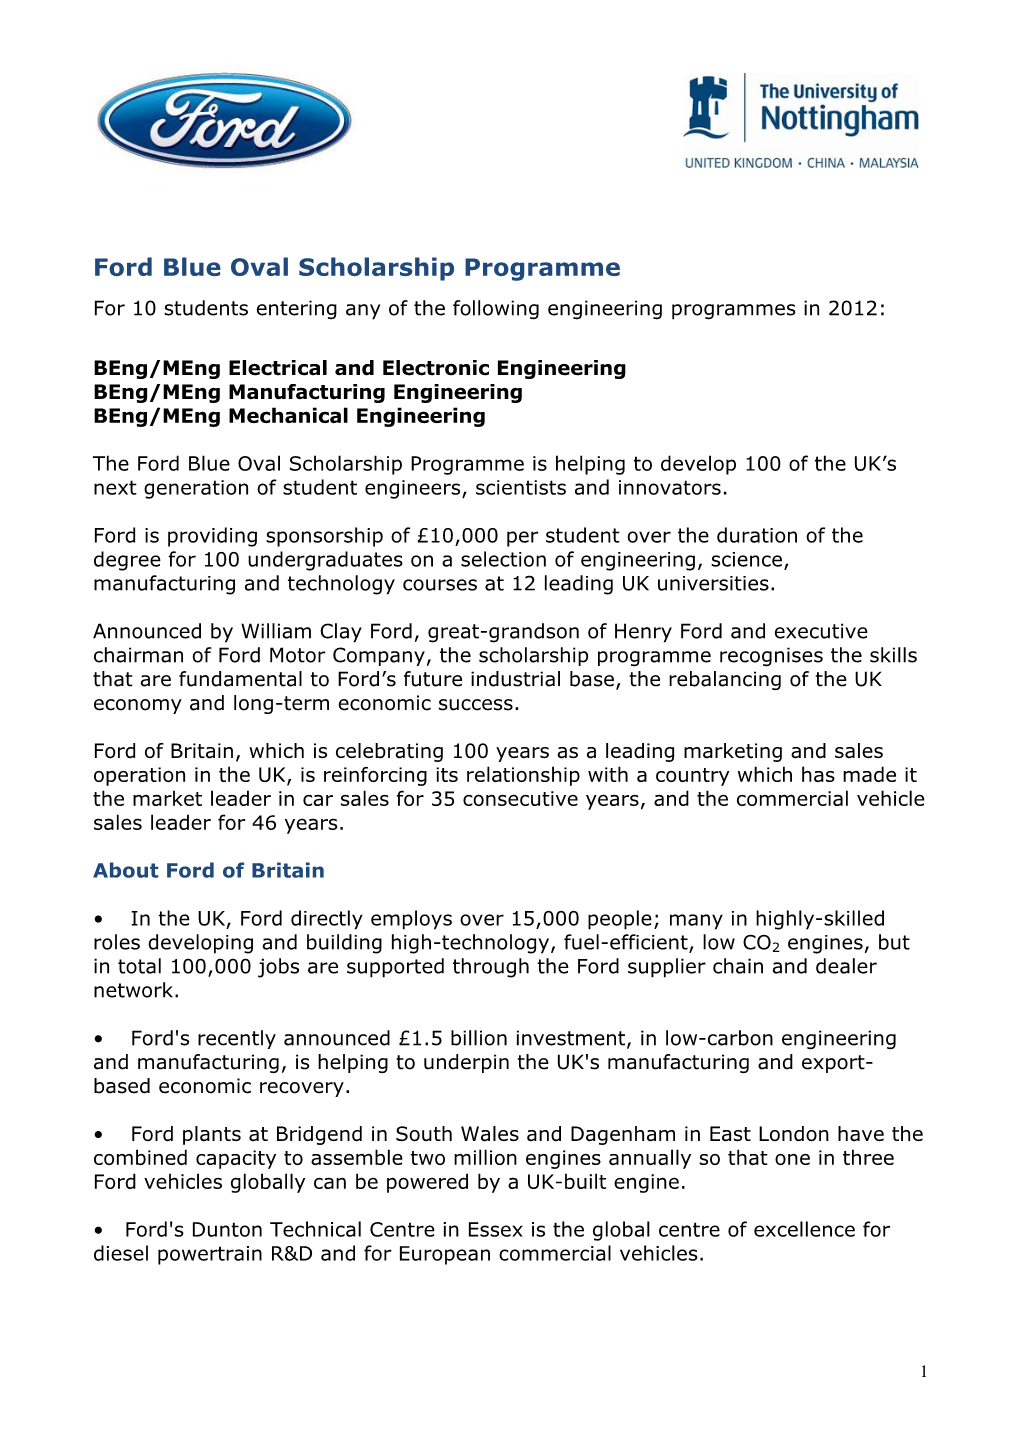 Ford Blue Oval Scholarship Programme for 10 Students Entering Any of the Following Engineering Programmes in 2012